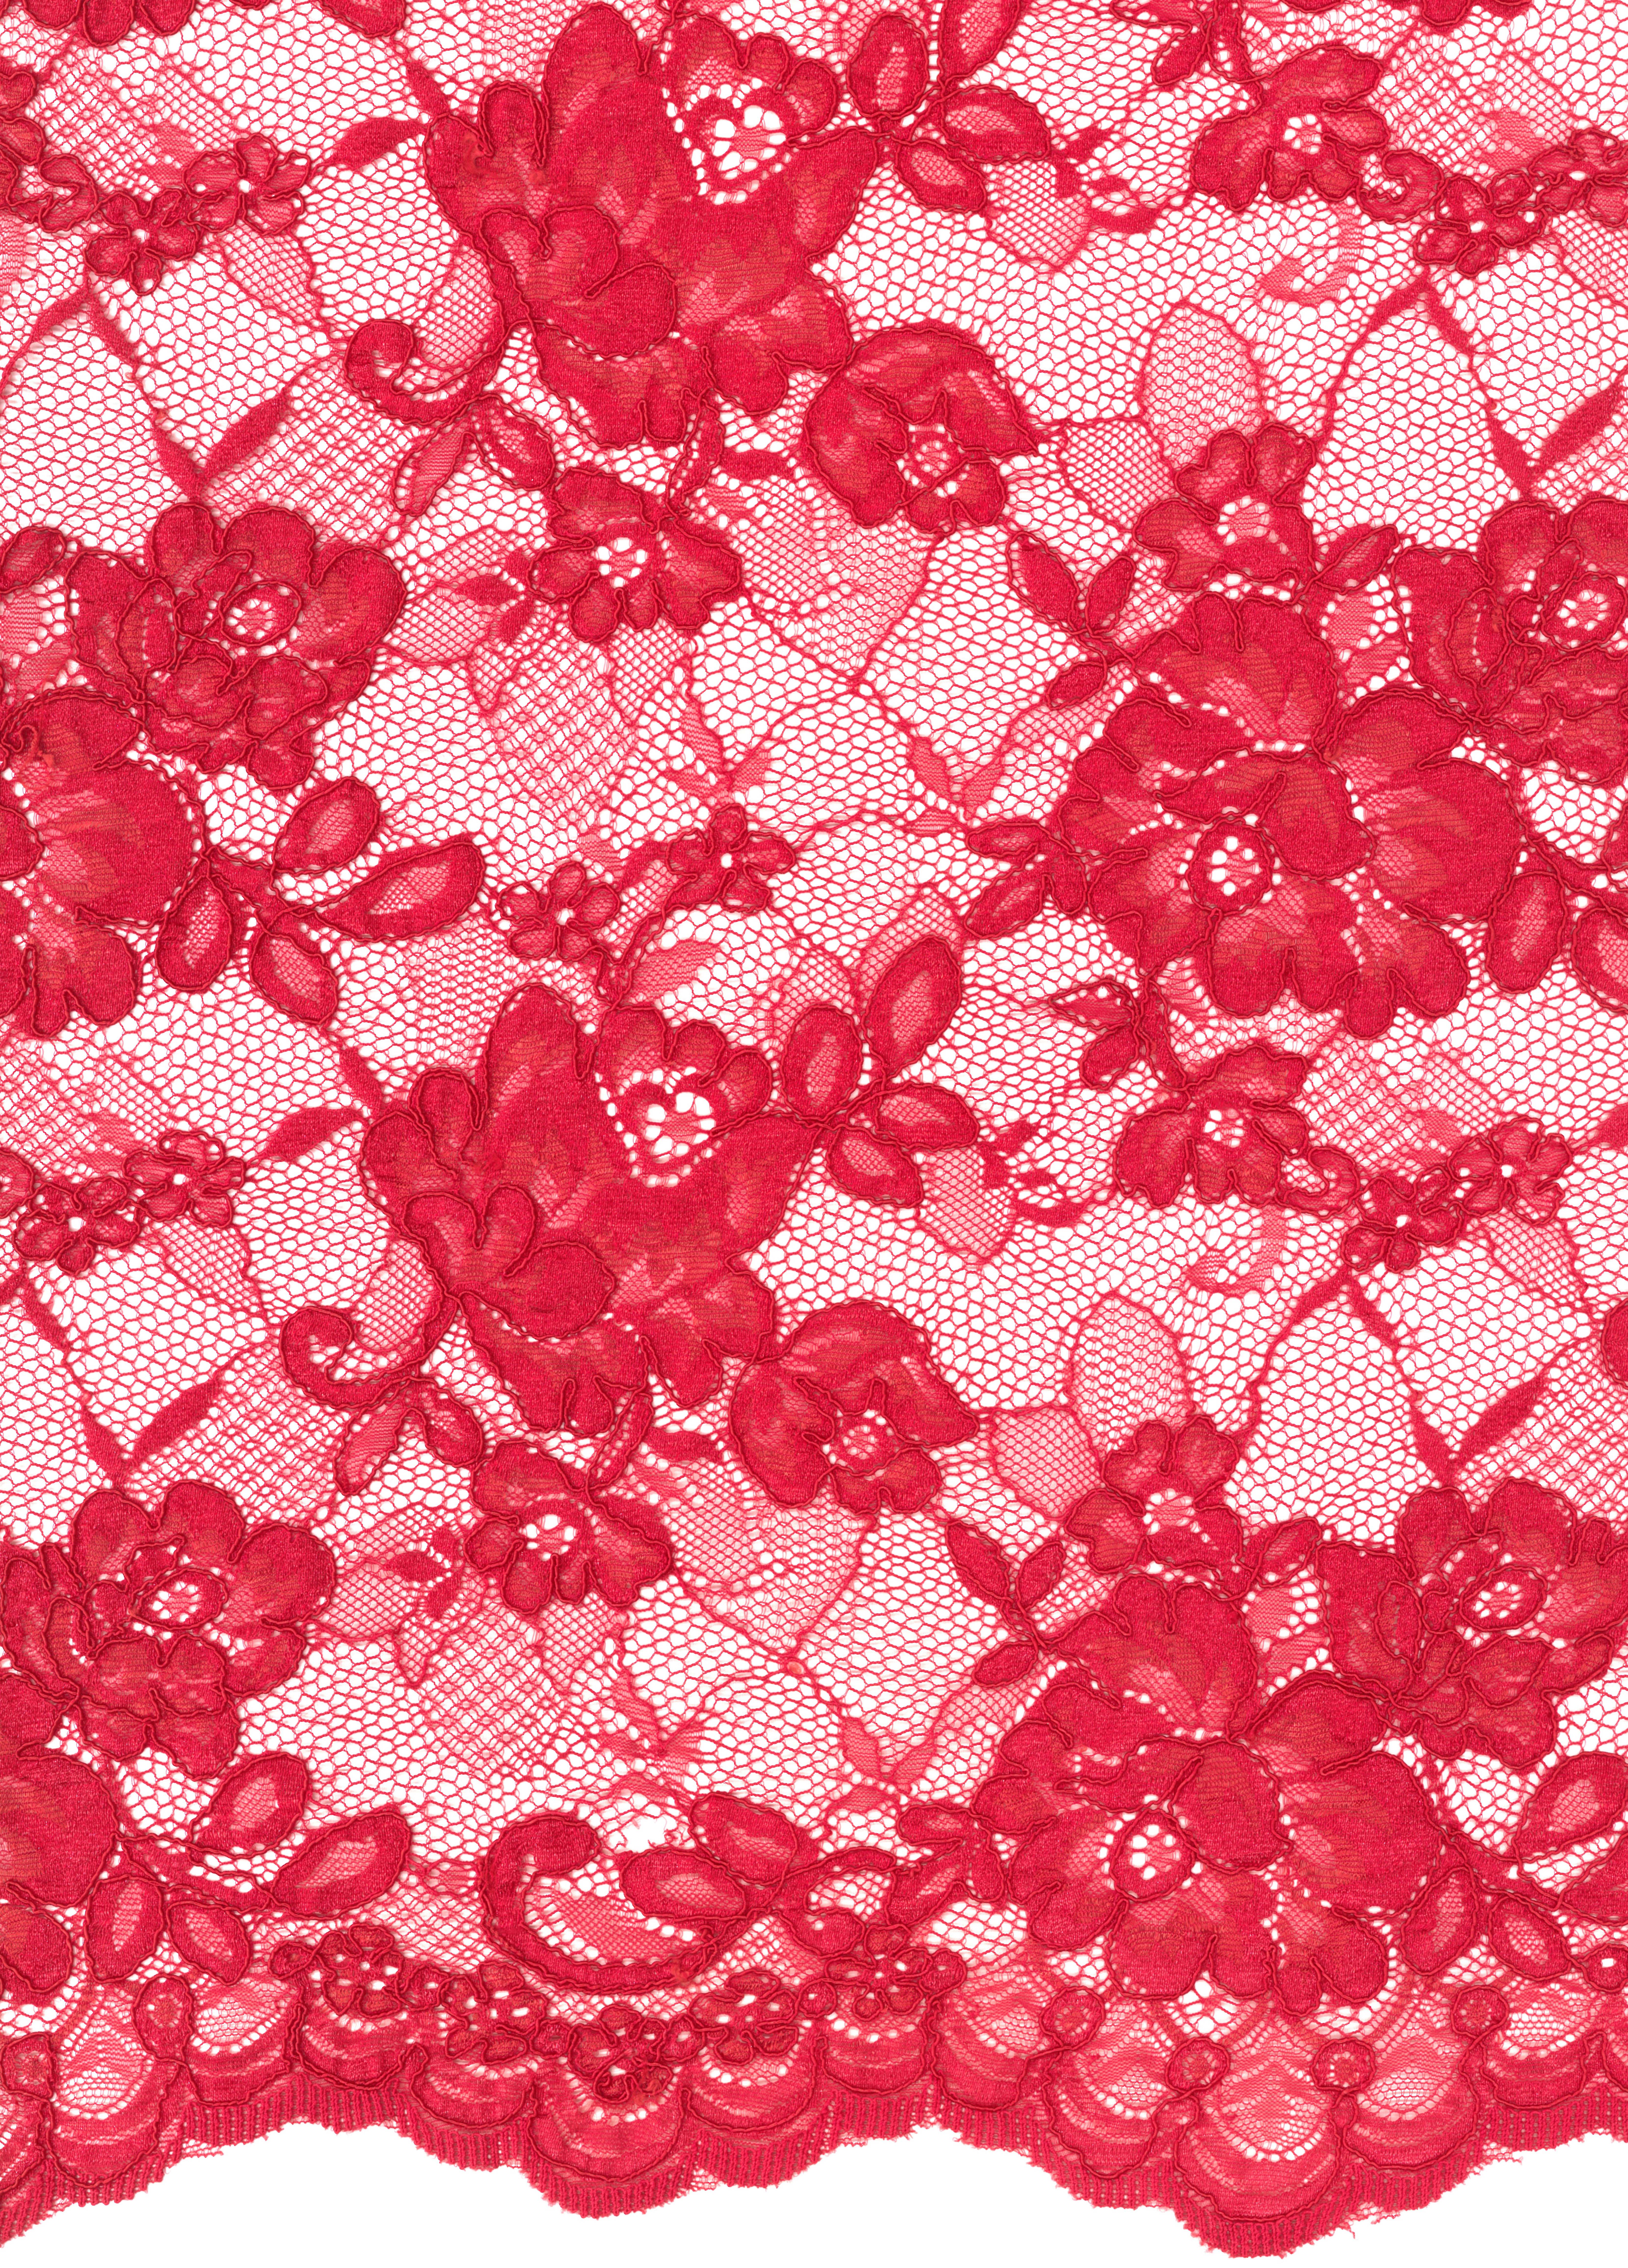 CORDED LACE - RED